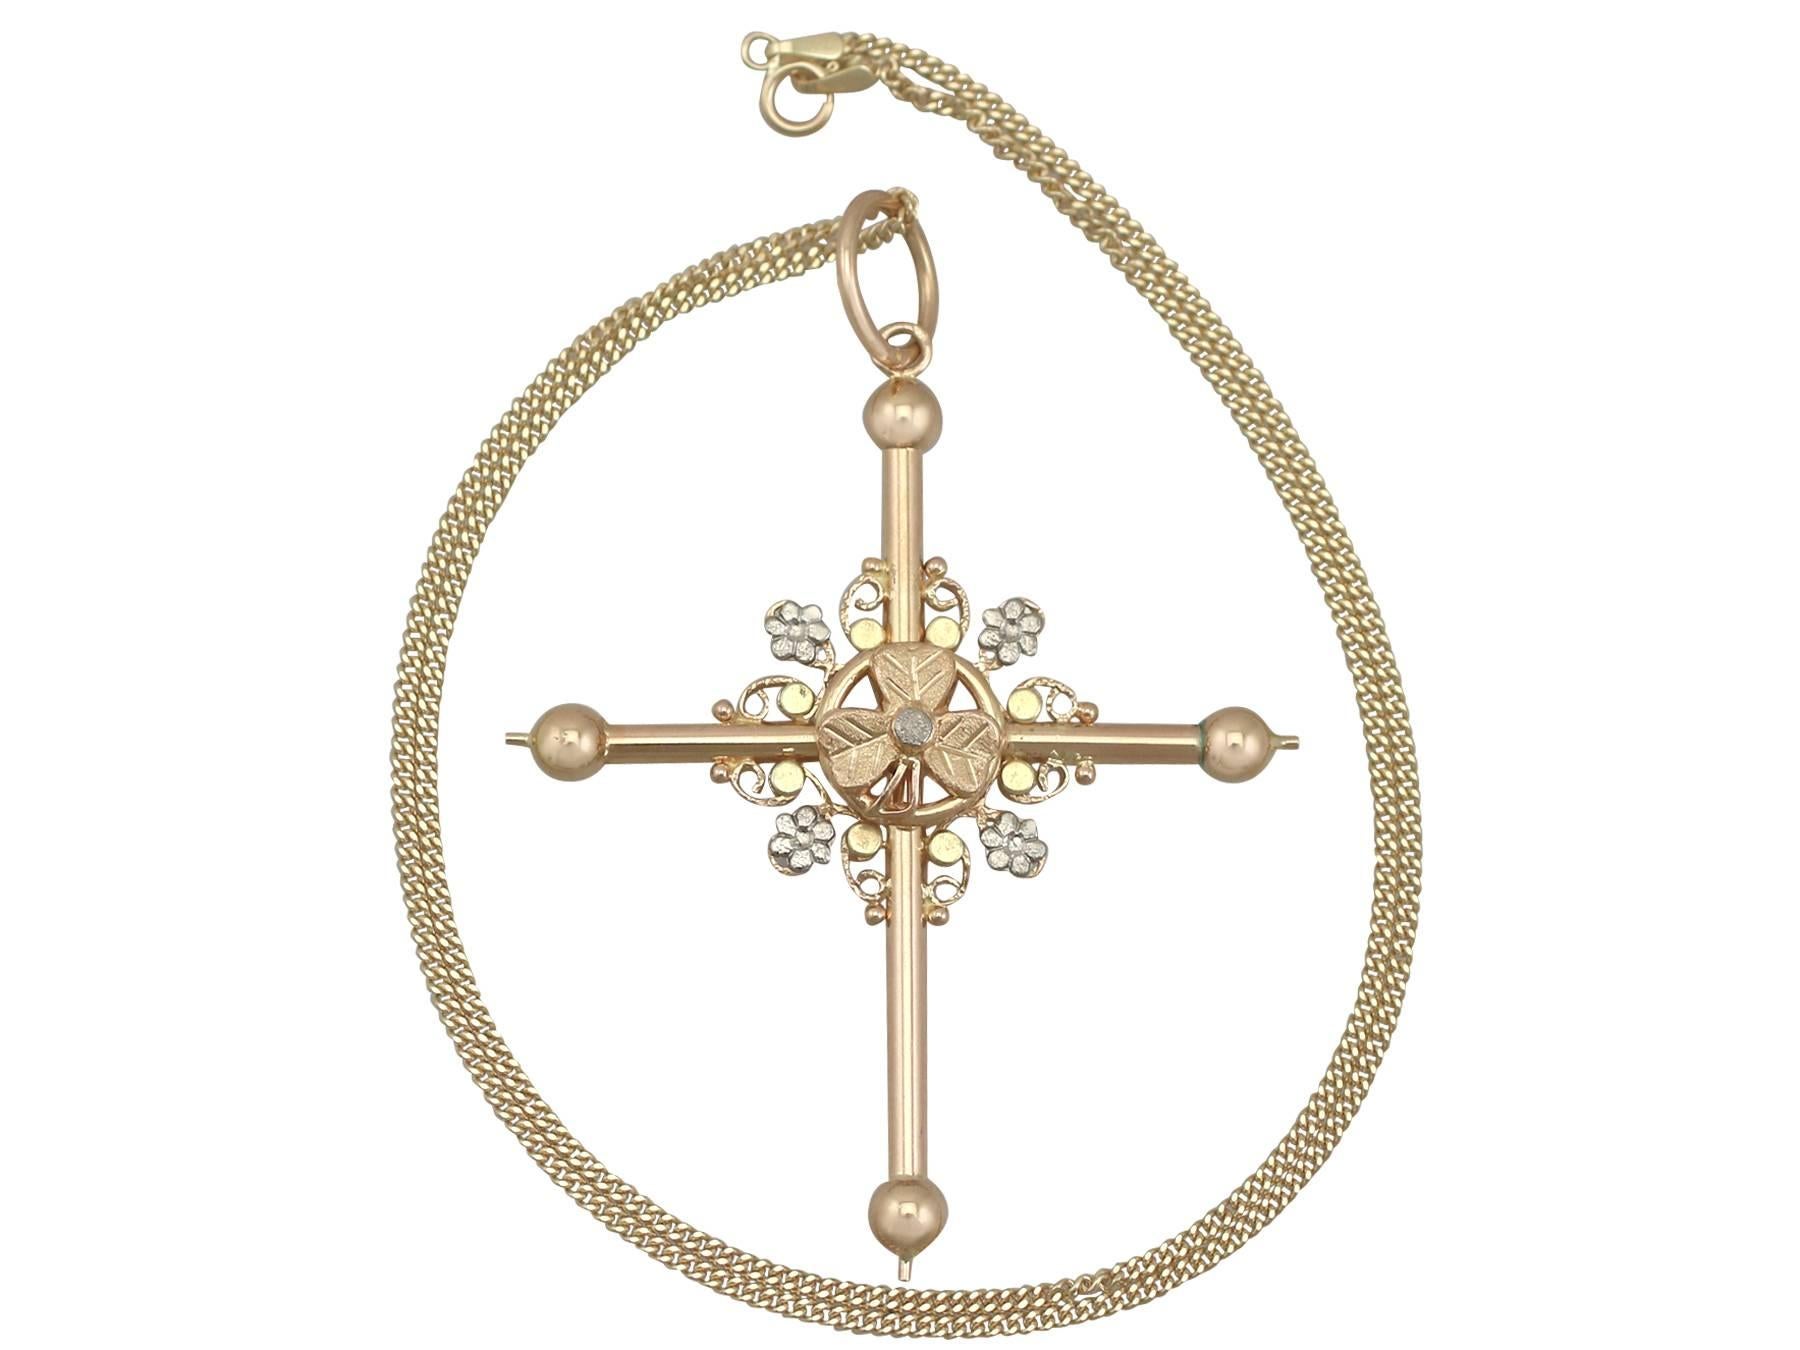 An impressive antique French 18k rose, white and yellow gold cross pendant; part of our diverse antique jewellery and estate jewelry collections.

This fine and impressive antique French cross pendant has been crafted in 18k rose gold with 18k